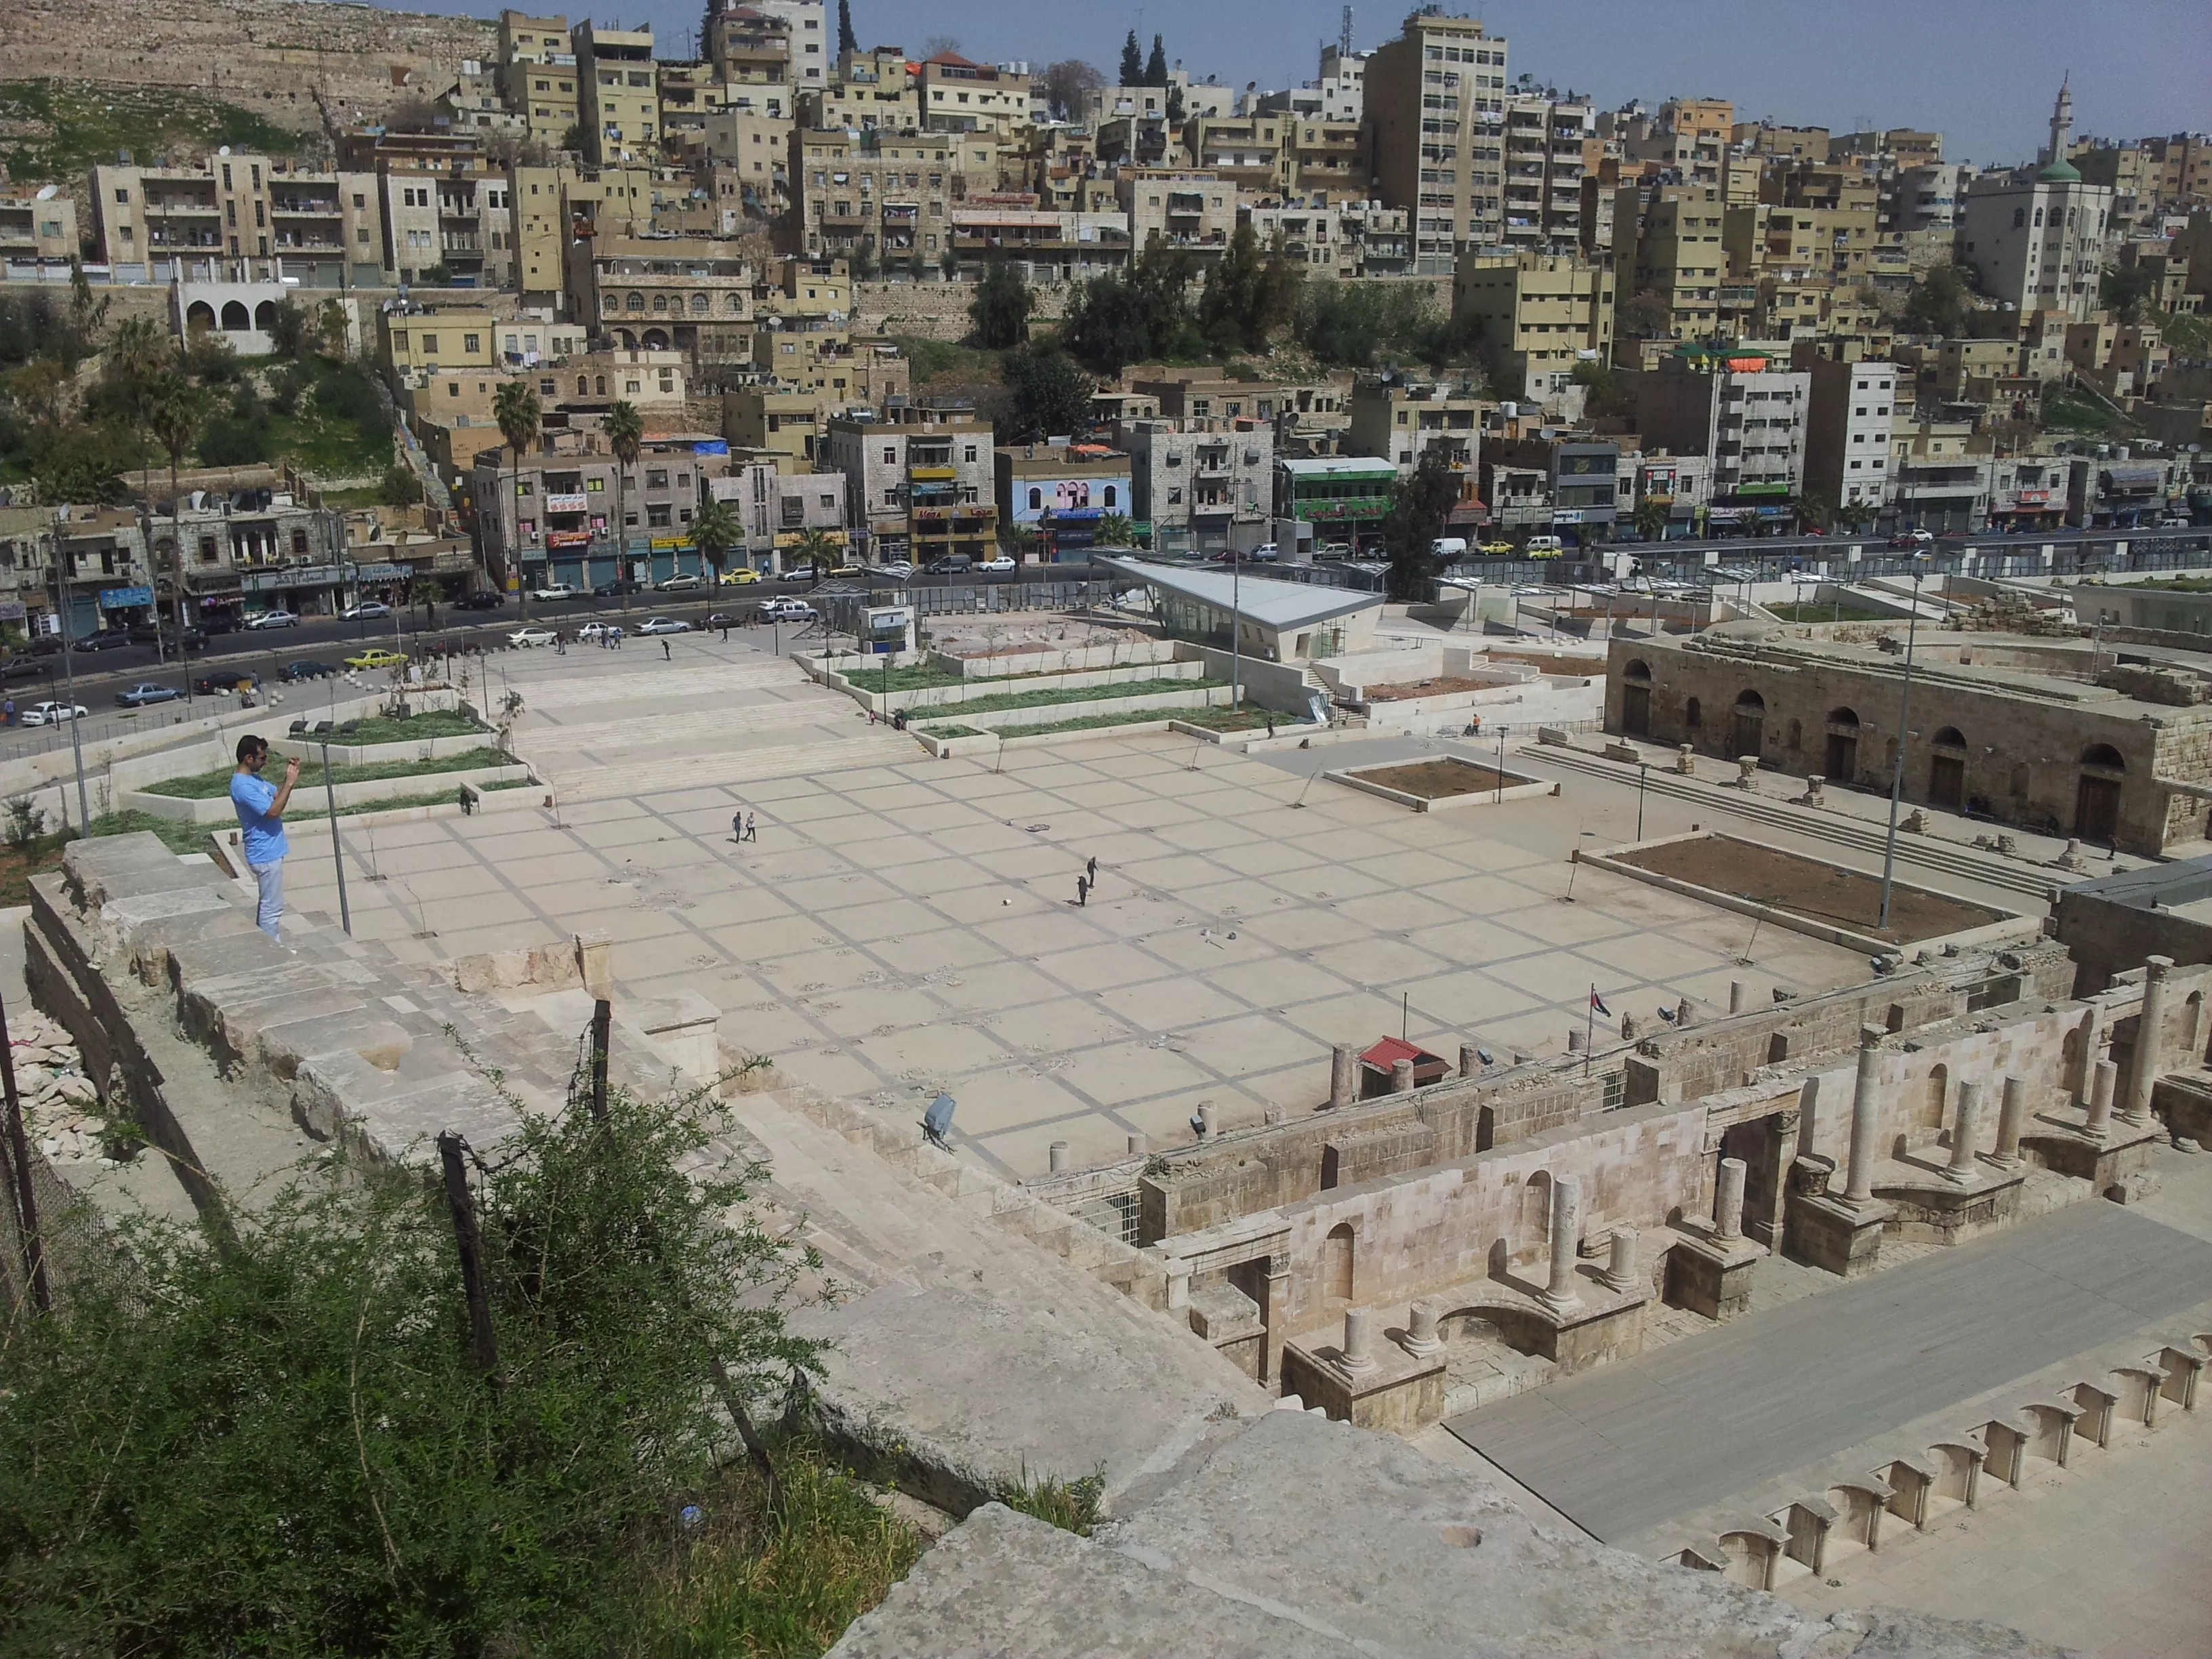 The Hashemite Plaza in Jordan, Middle East | Parks - Rated 3.8